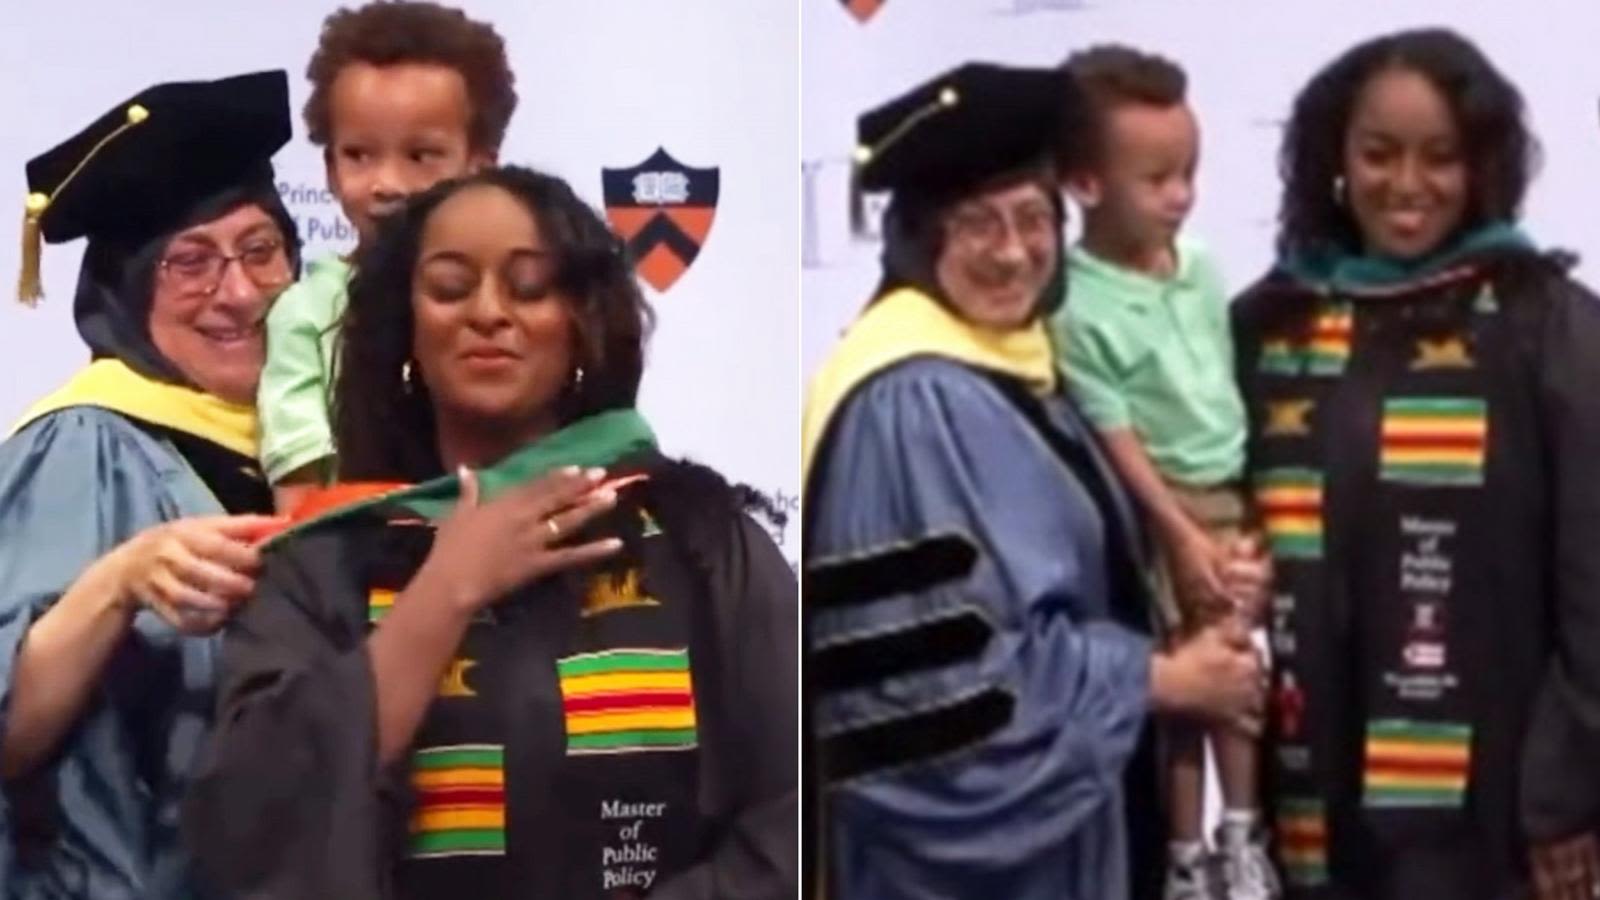 Graduating mom gets master's hood from 3-year-old son: 'I hope he never forgets it'